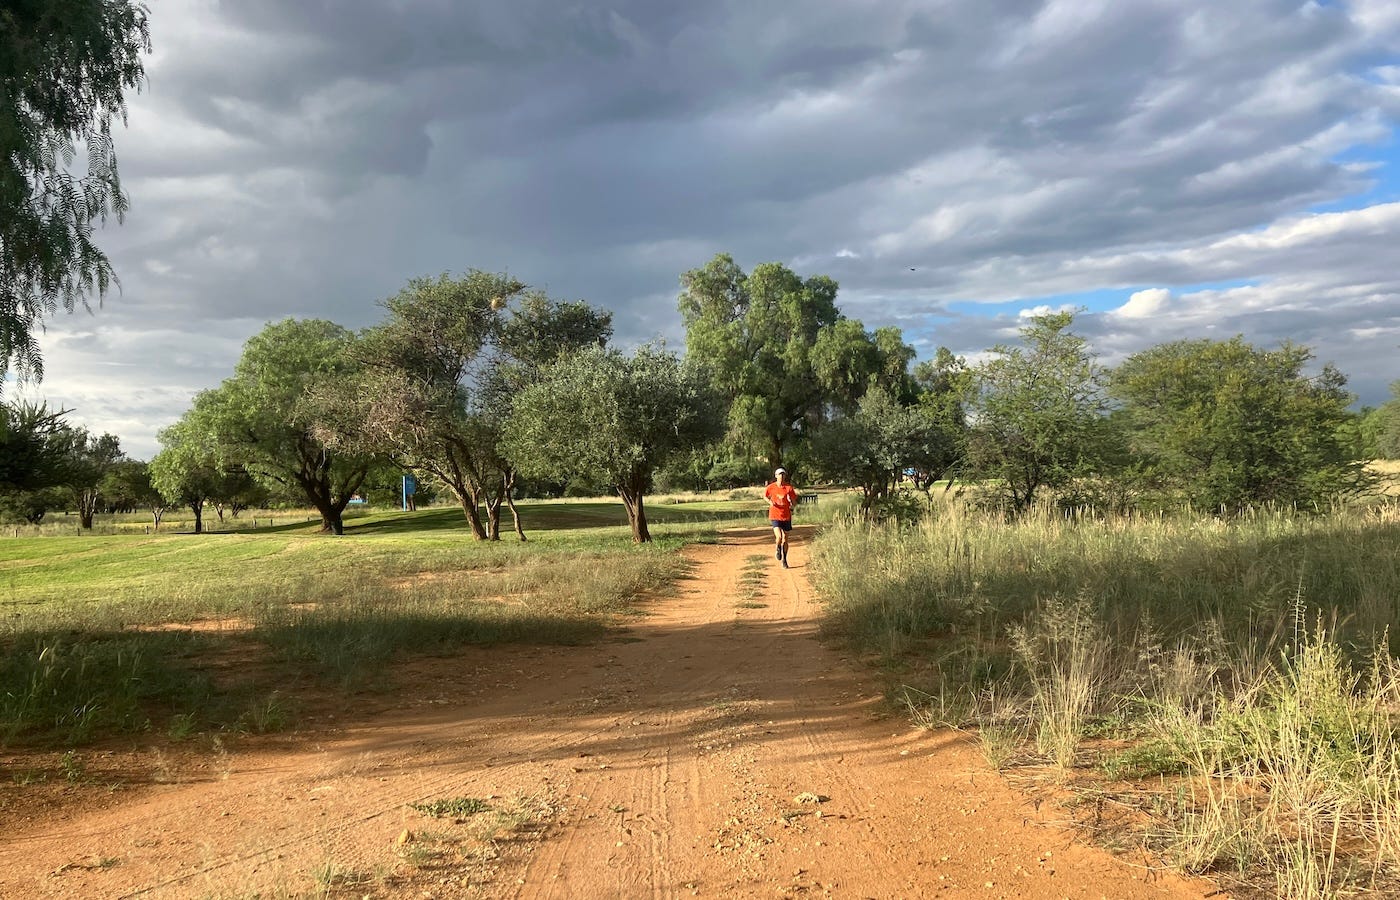 A runner approaching on the other side of a track, trees and a cloudy sky in the distance